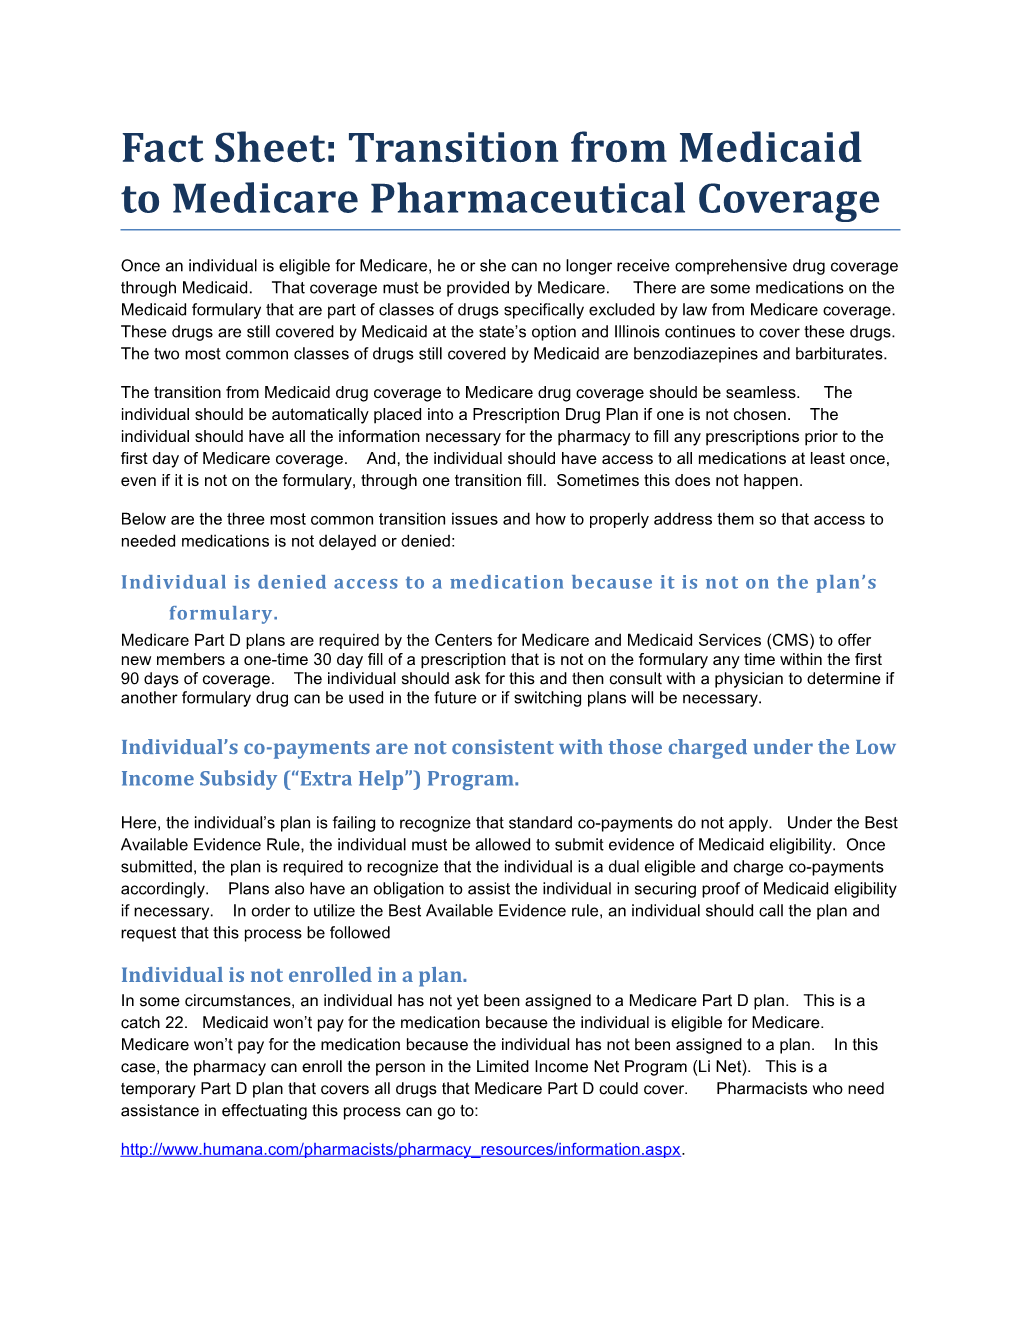 Fact Sheet: Transition from Medicaid to Medicare Pharmaceutical Coverage